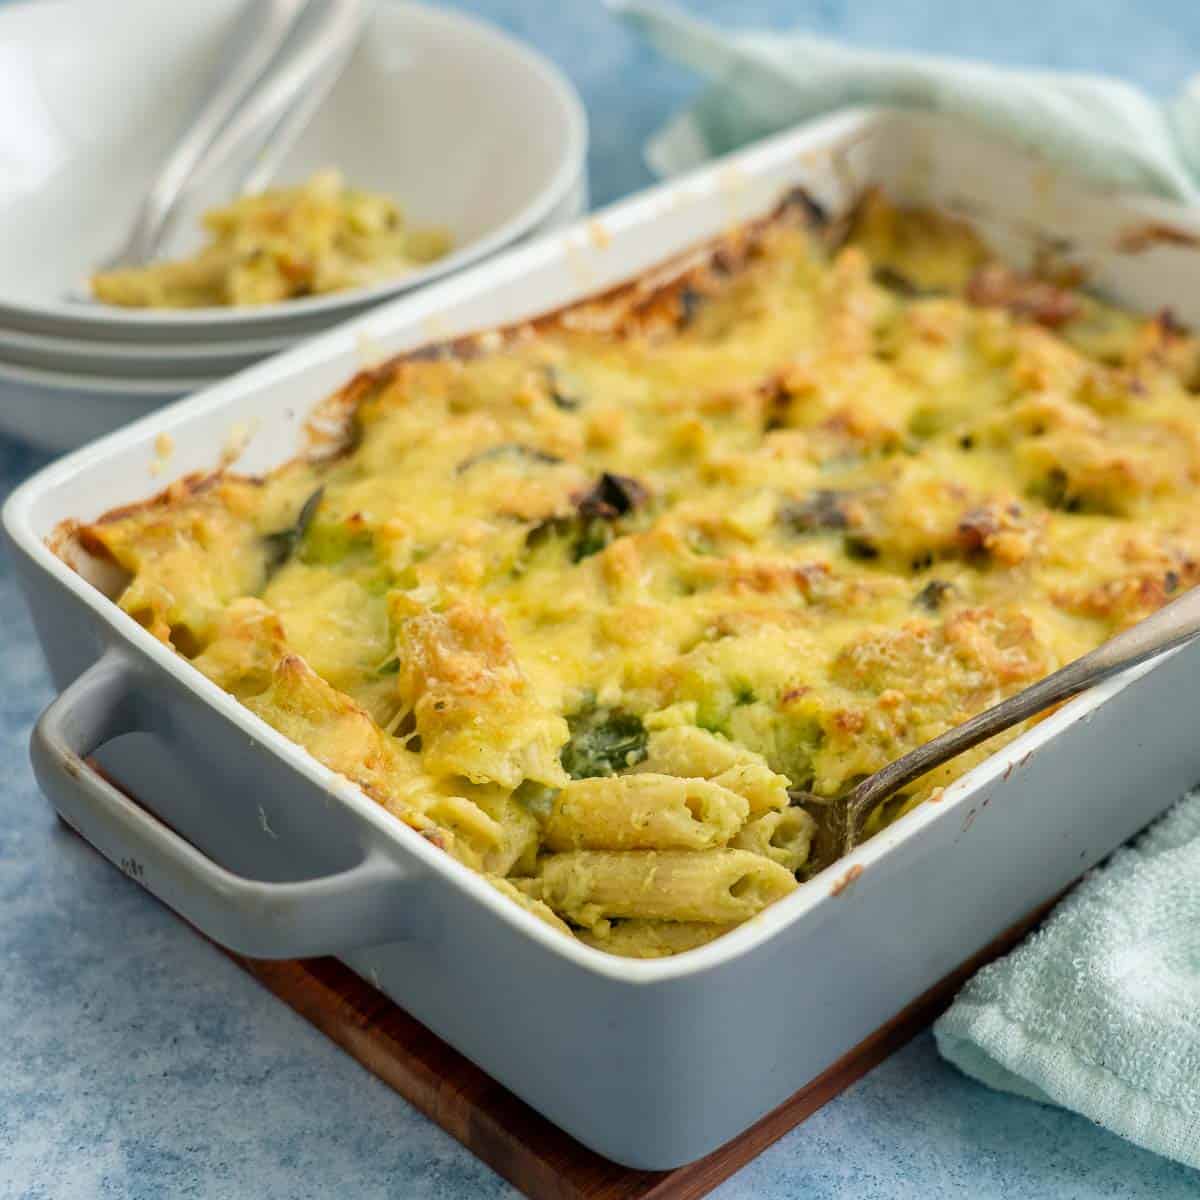 A slate blue rectangular ceramic baking dish filled with a cheesy pasta bake